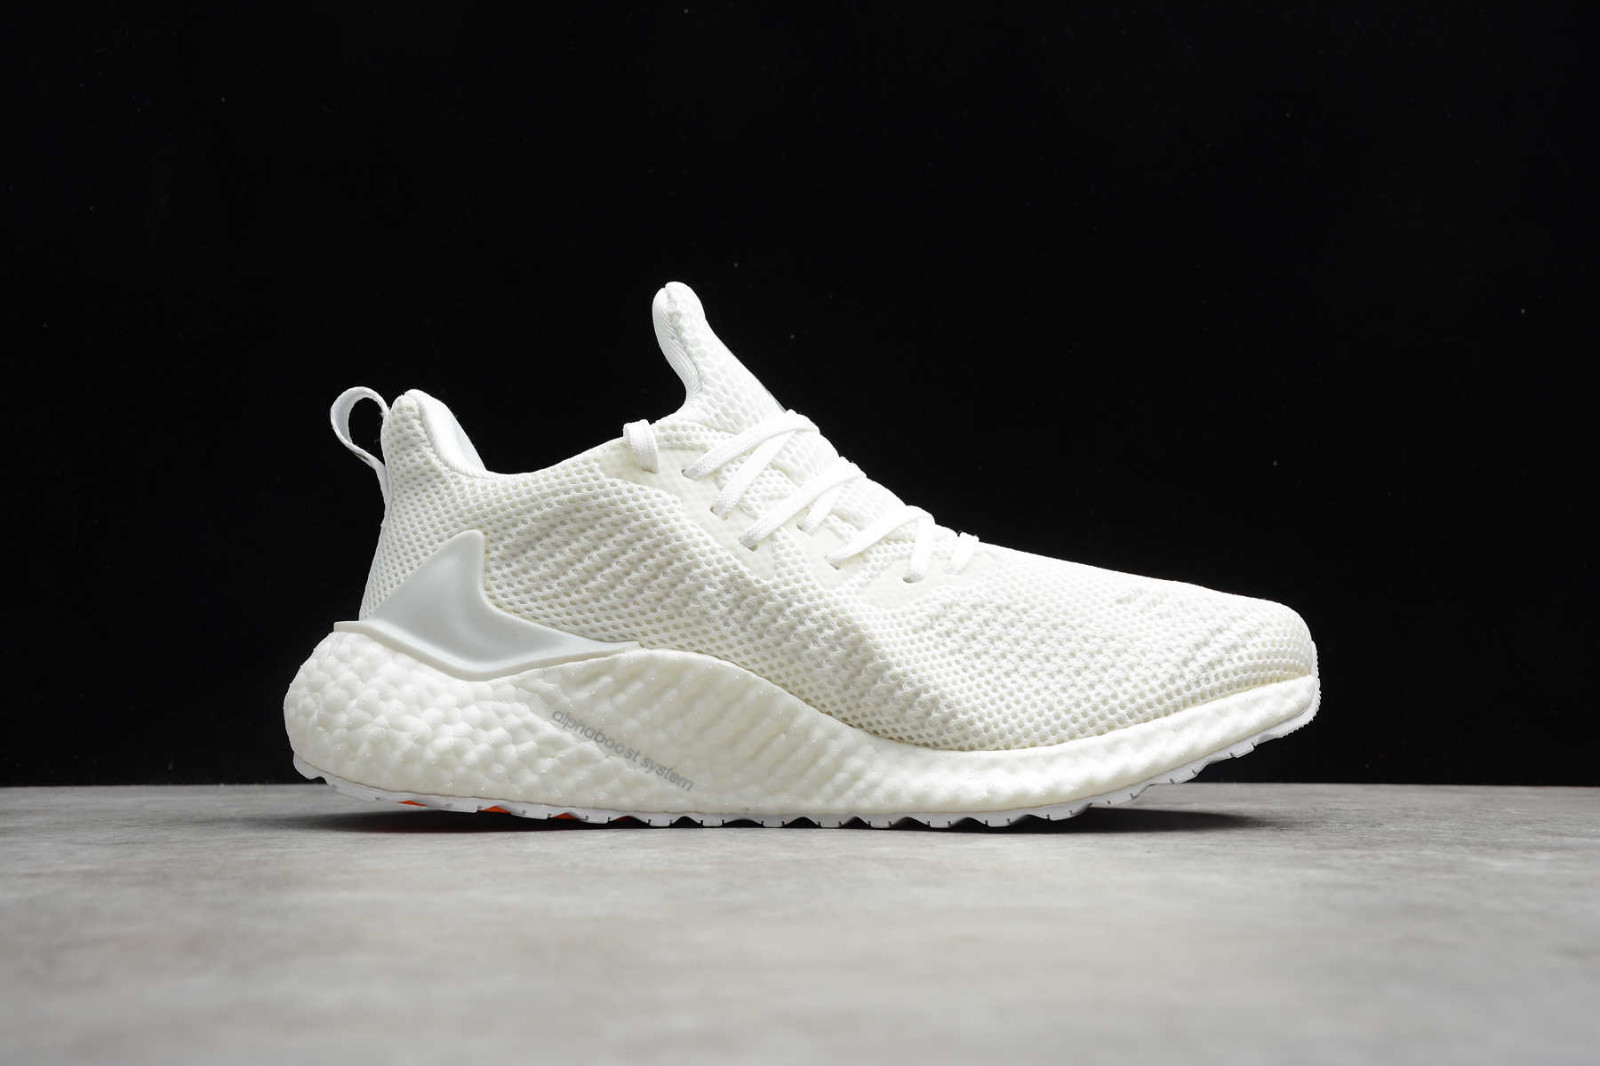 Adidas Alphabounce Boost 21 Cloud White Orange Running Shoes G97278 ...